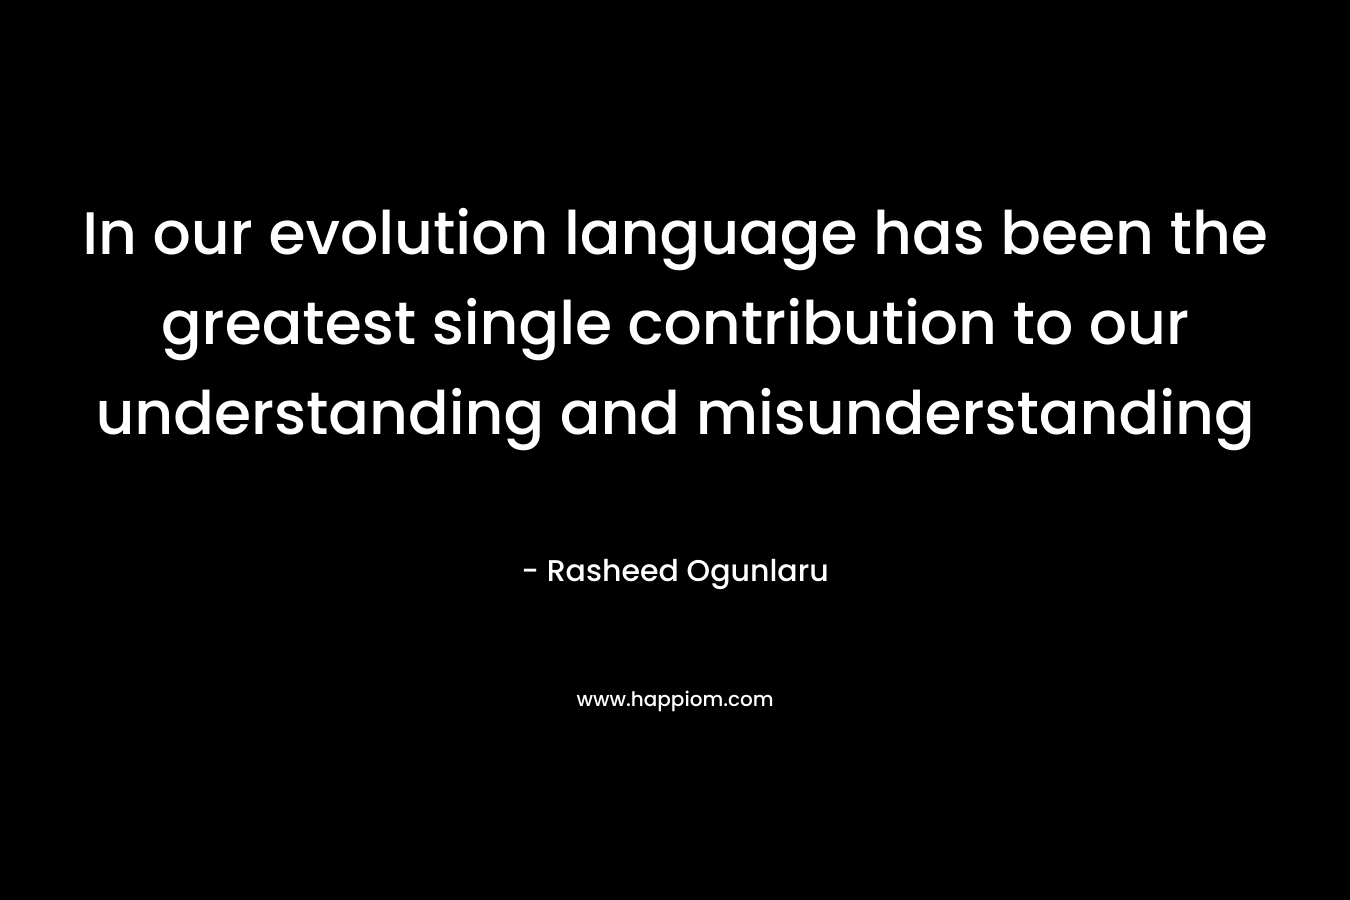 In our evolution language has been the greatest single contribution to our understanding and misunderstanding